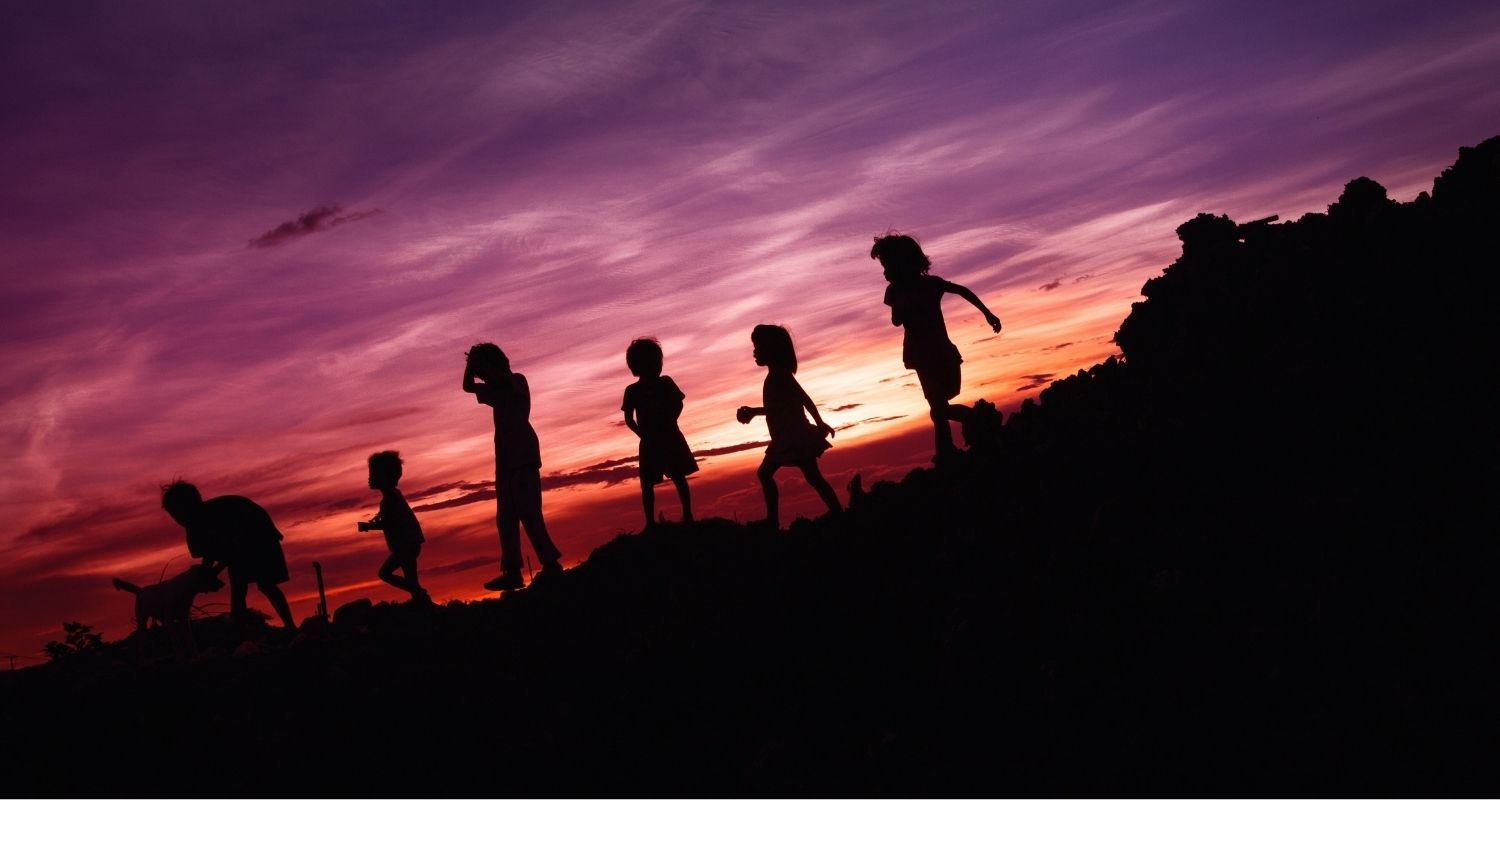 Kids playing at sunset - For Teens, Outdoor Recreation During the Pandemic Linked to Improved Well-Being - Parks, Recreation and Tourism Management at NC State University